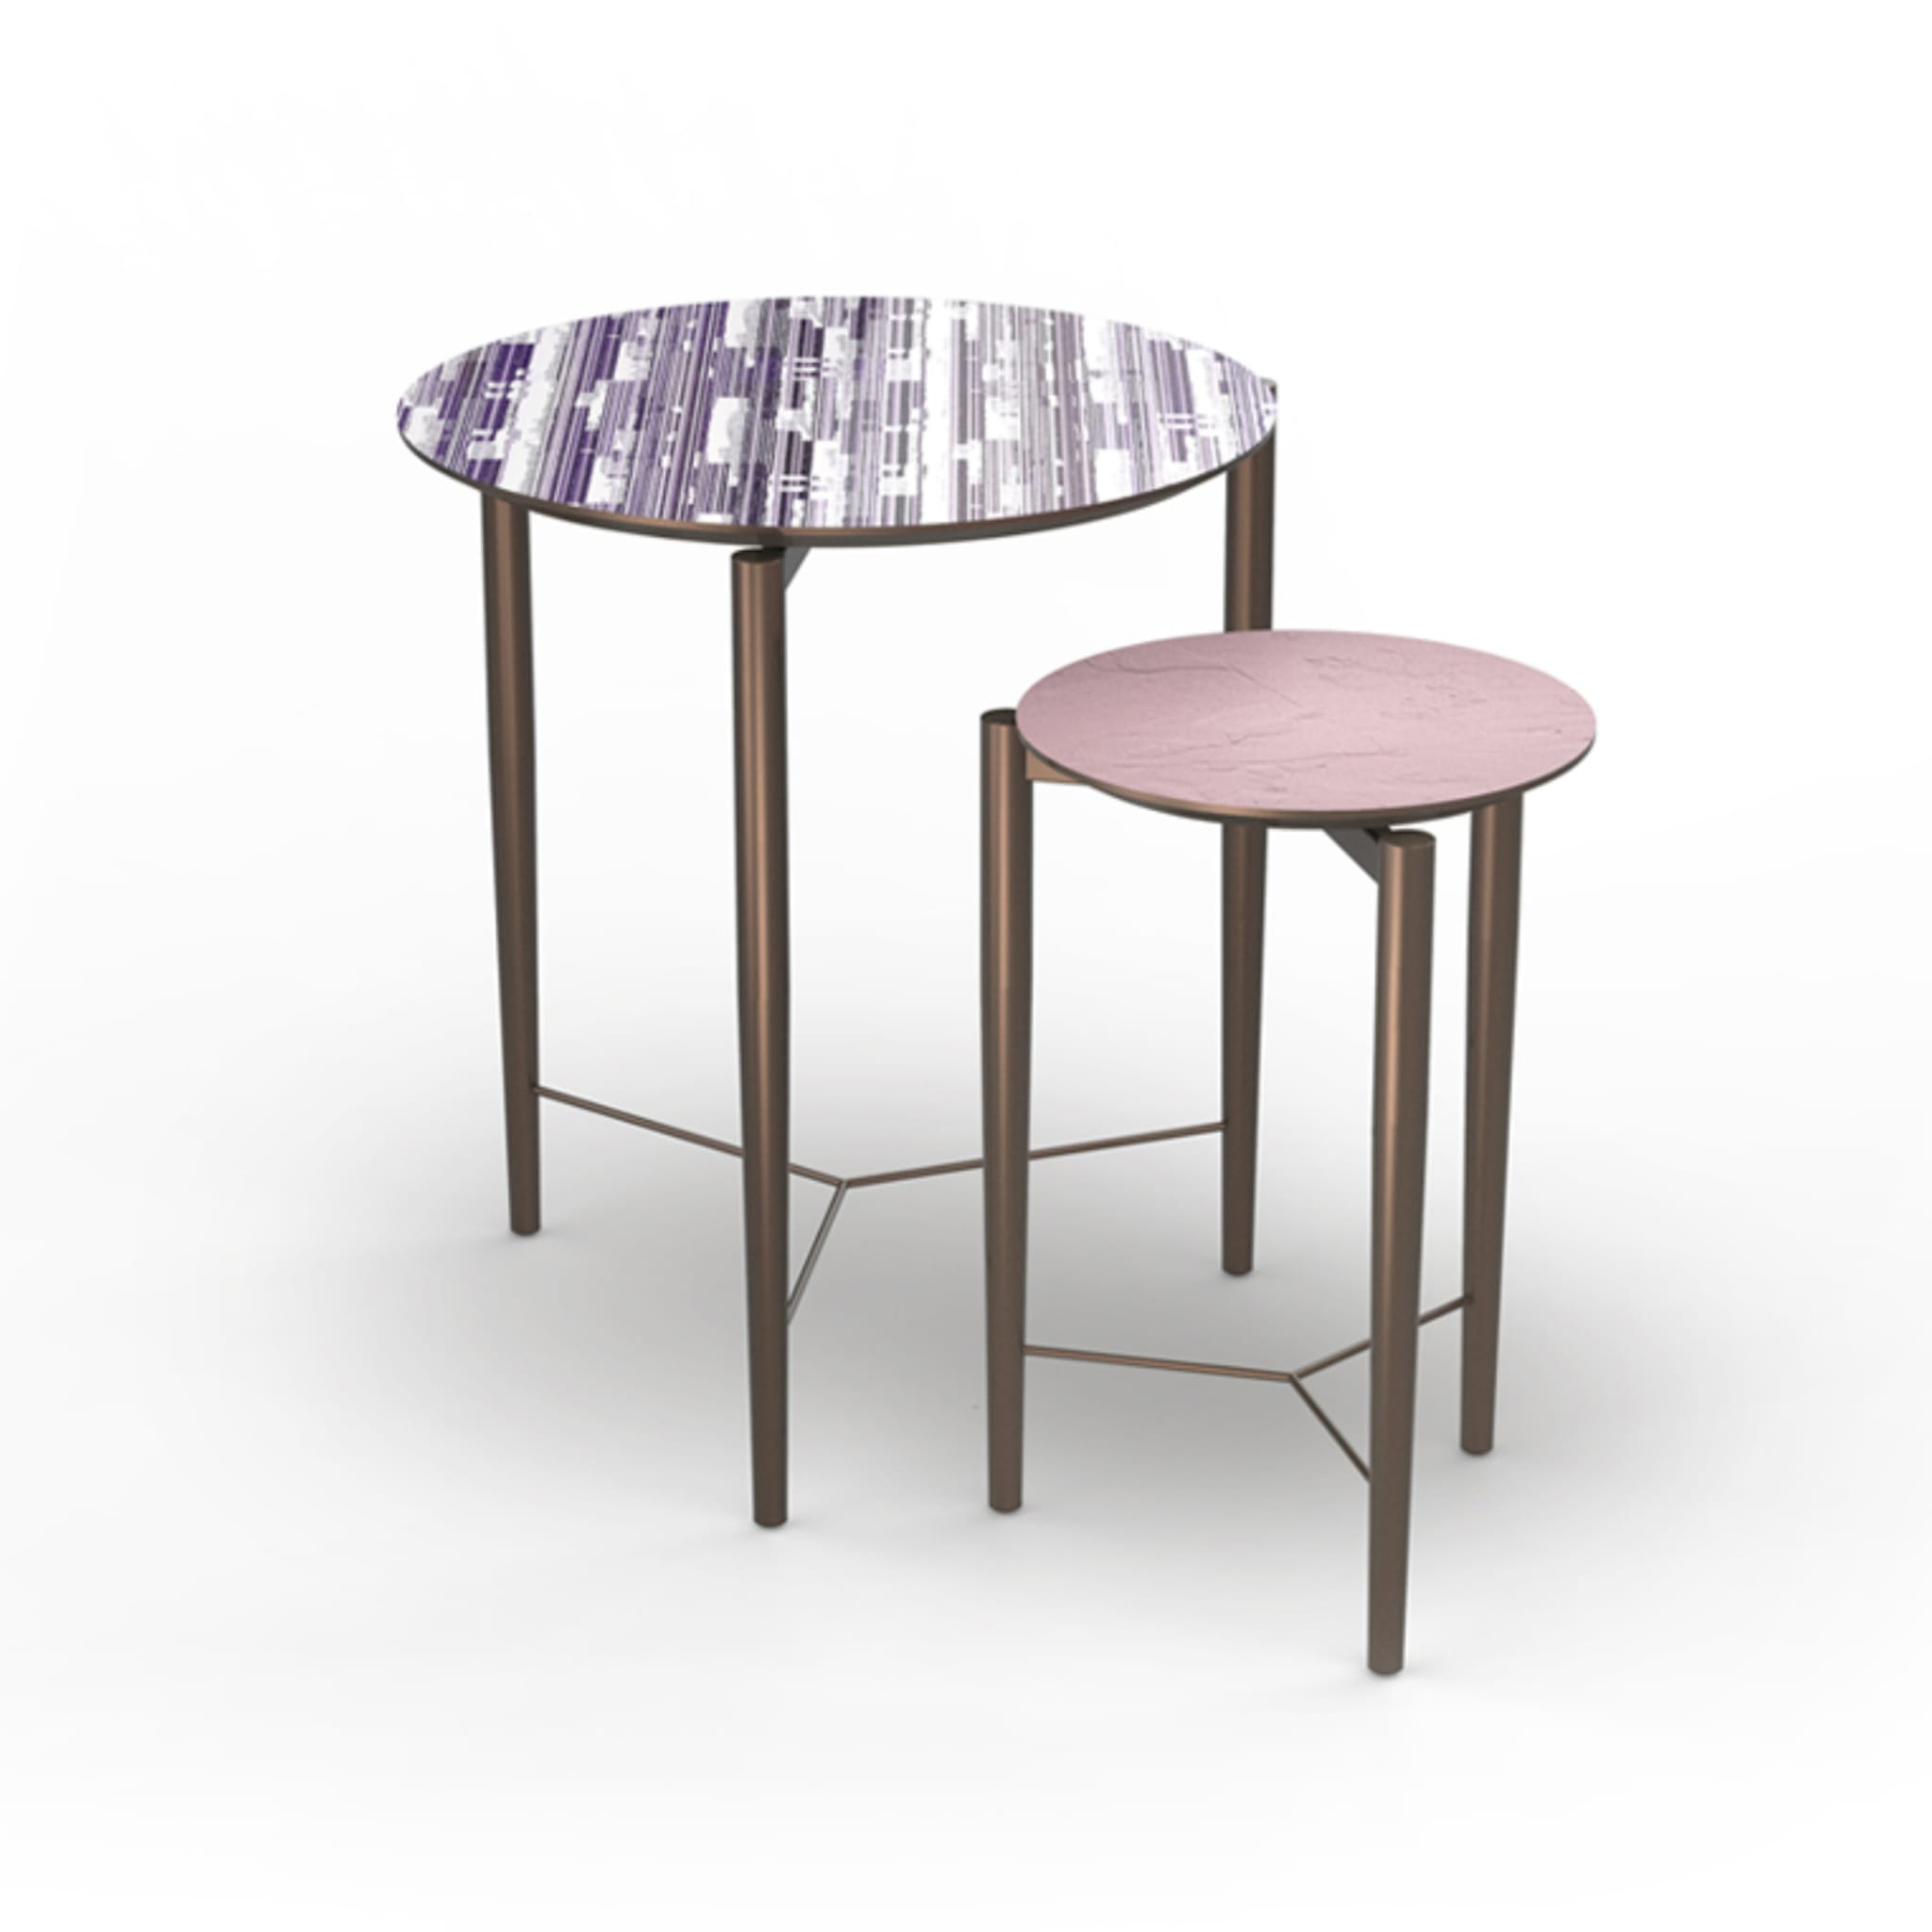 Dalì Large Round Side Table - Alternative view 1